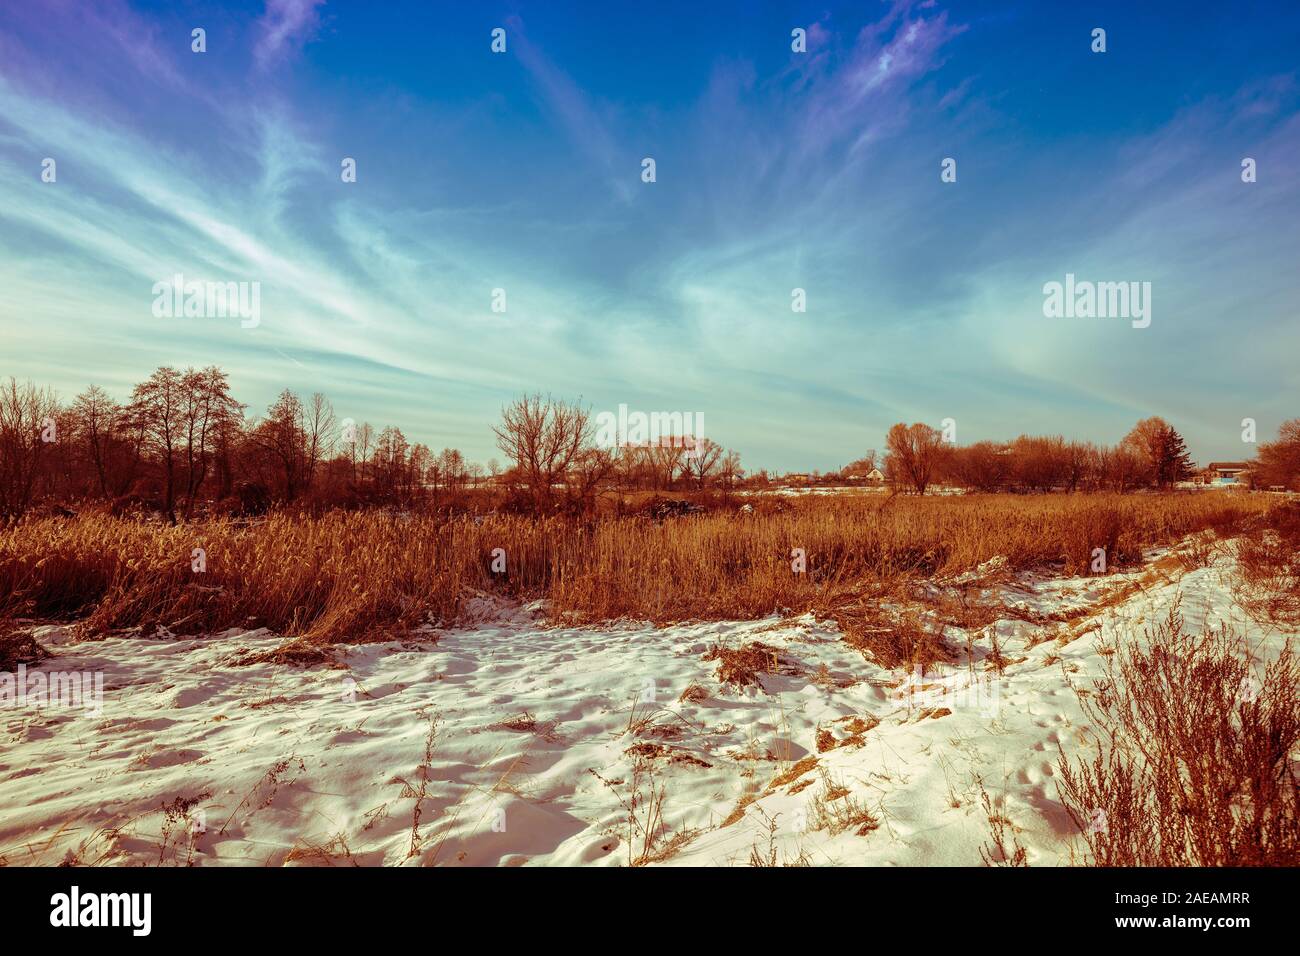 Winter rural landscape. Trees on the snowy field. Nature snowy landscape Stock Photo